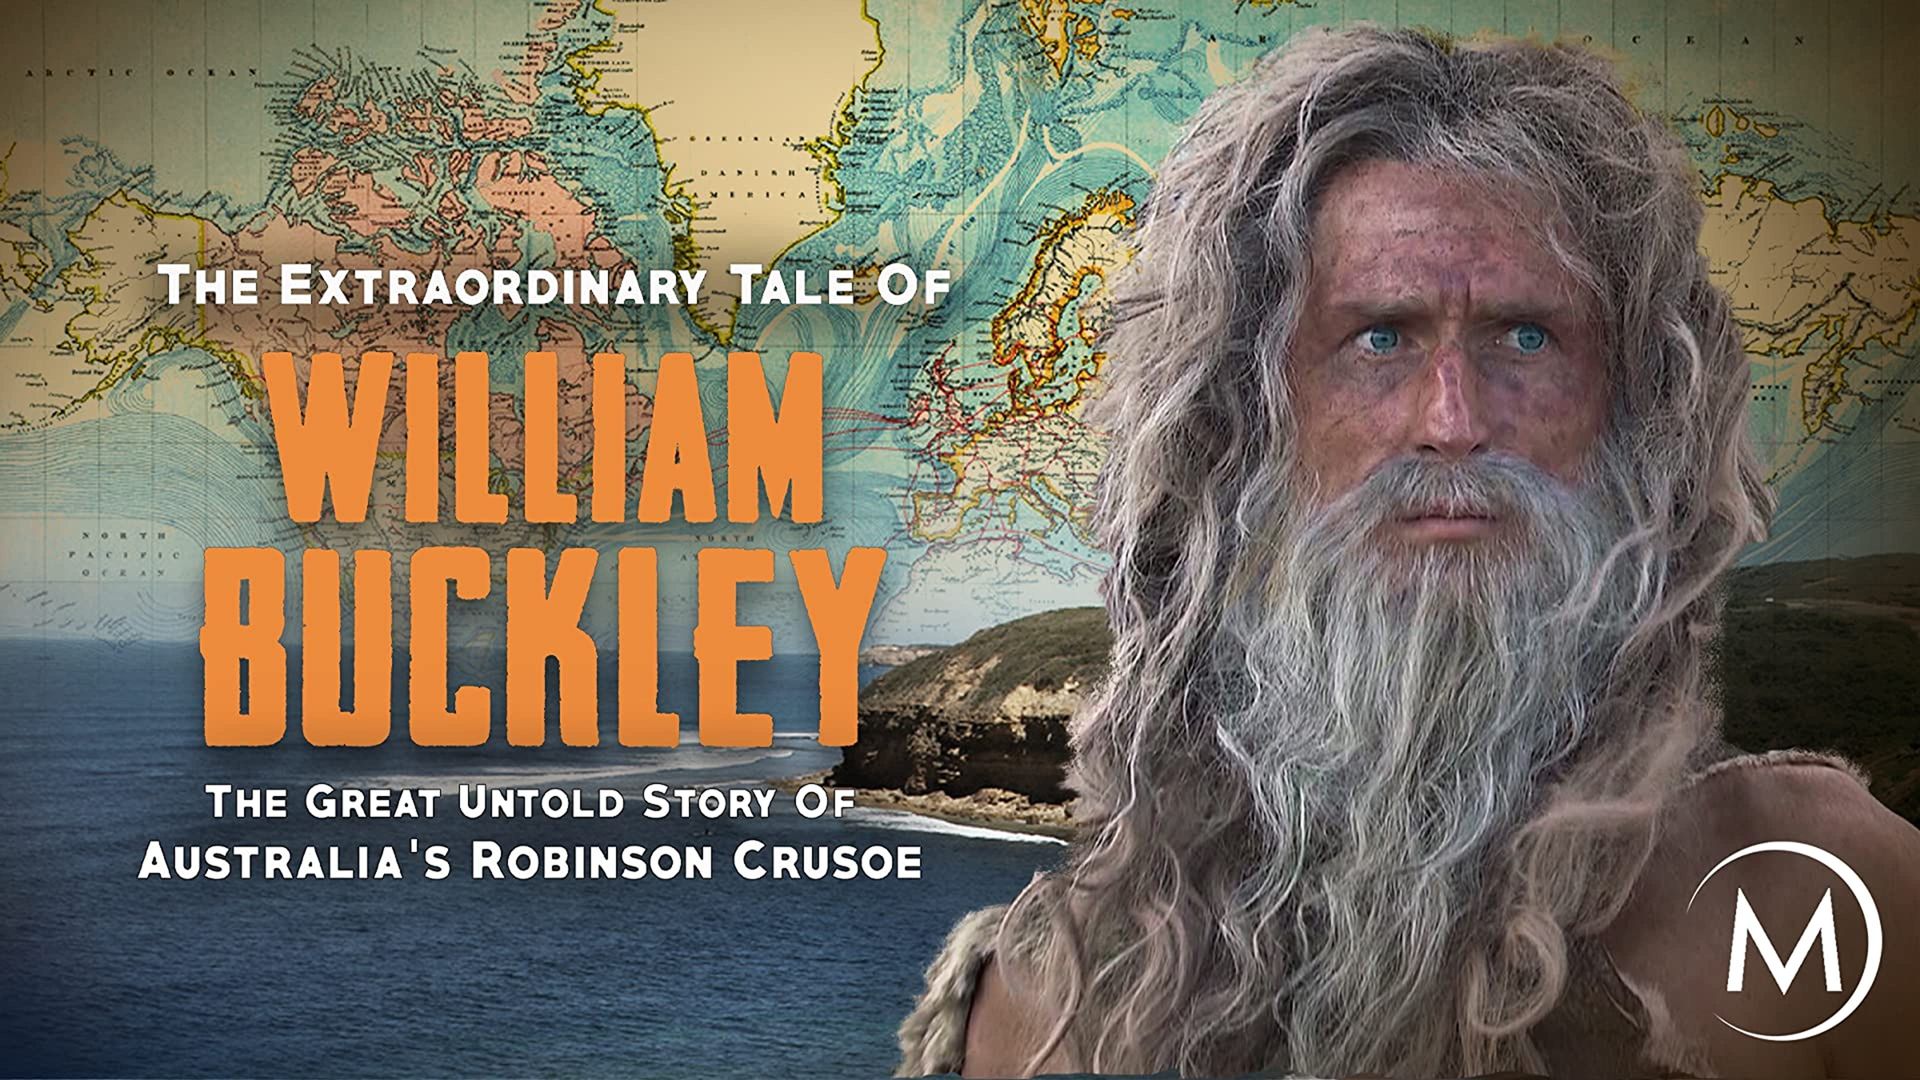 The Extraordinary Tale of William Buckley: The great untold story of Australia's Robinson Crusoe background